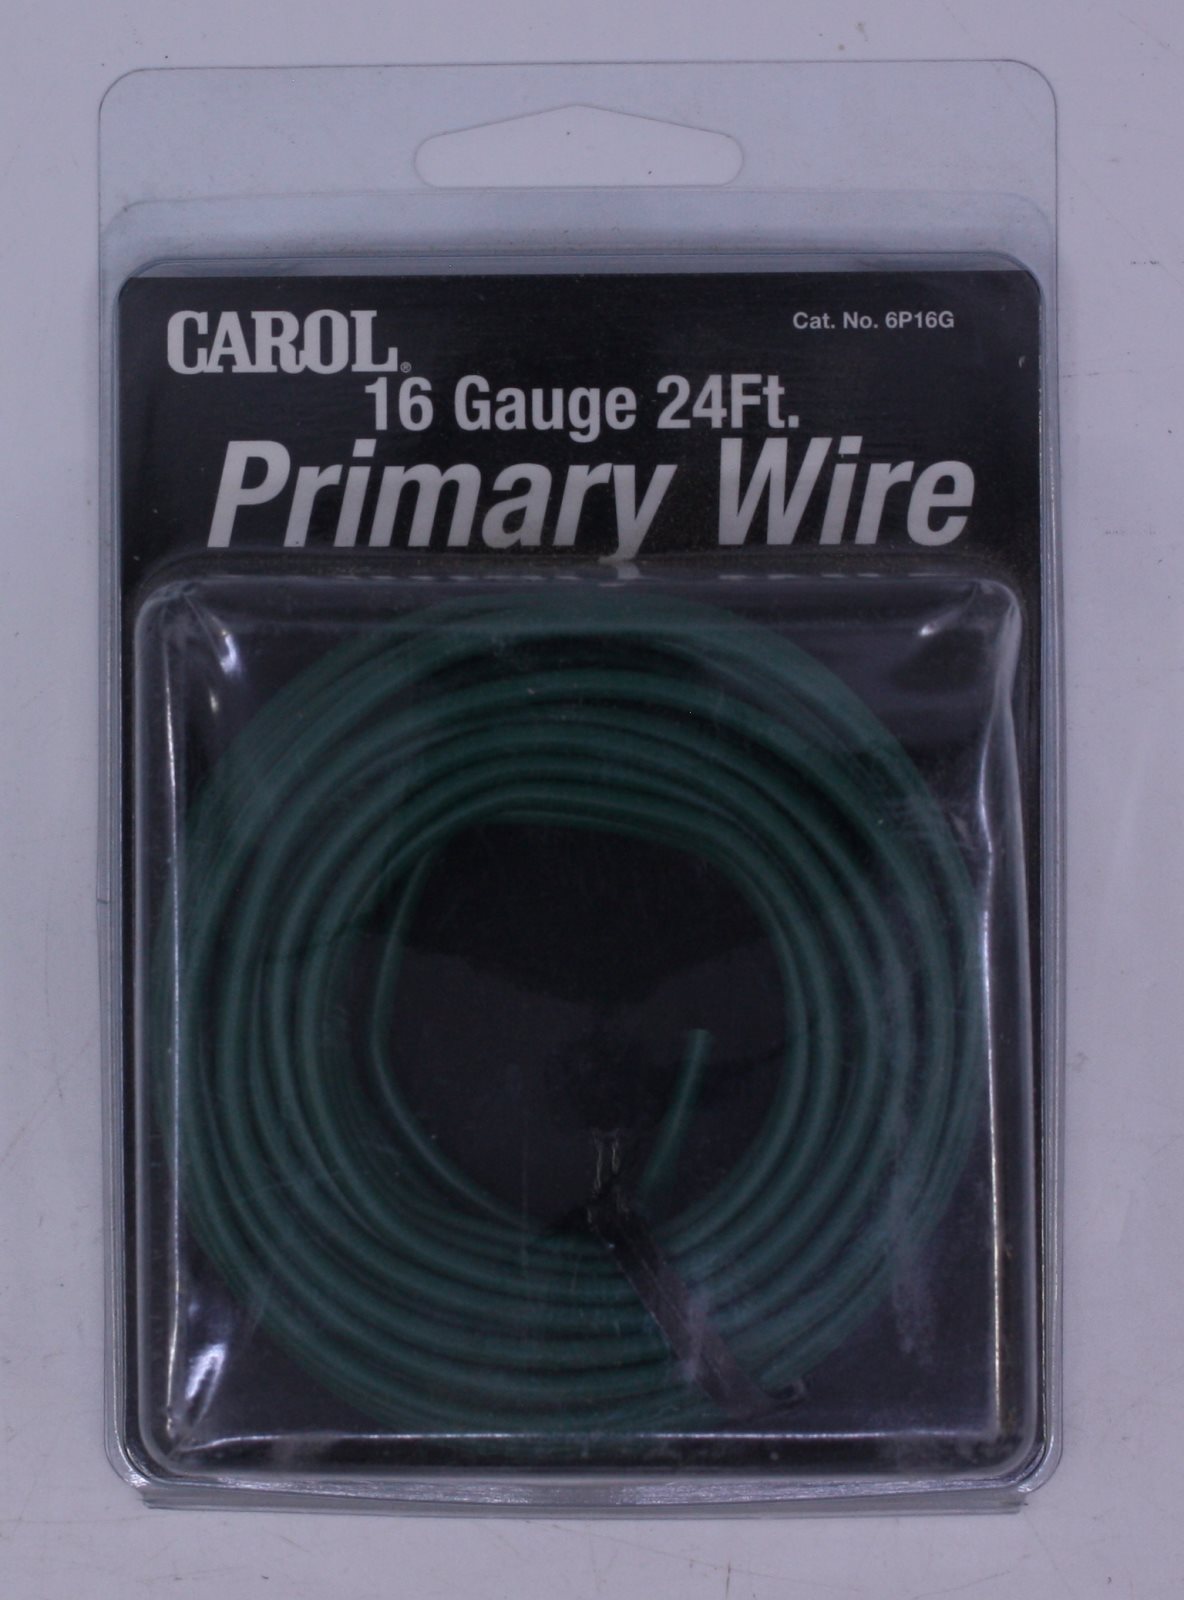 Carol 6P16G 24' Primary Wire by General Cable